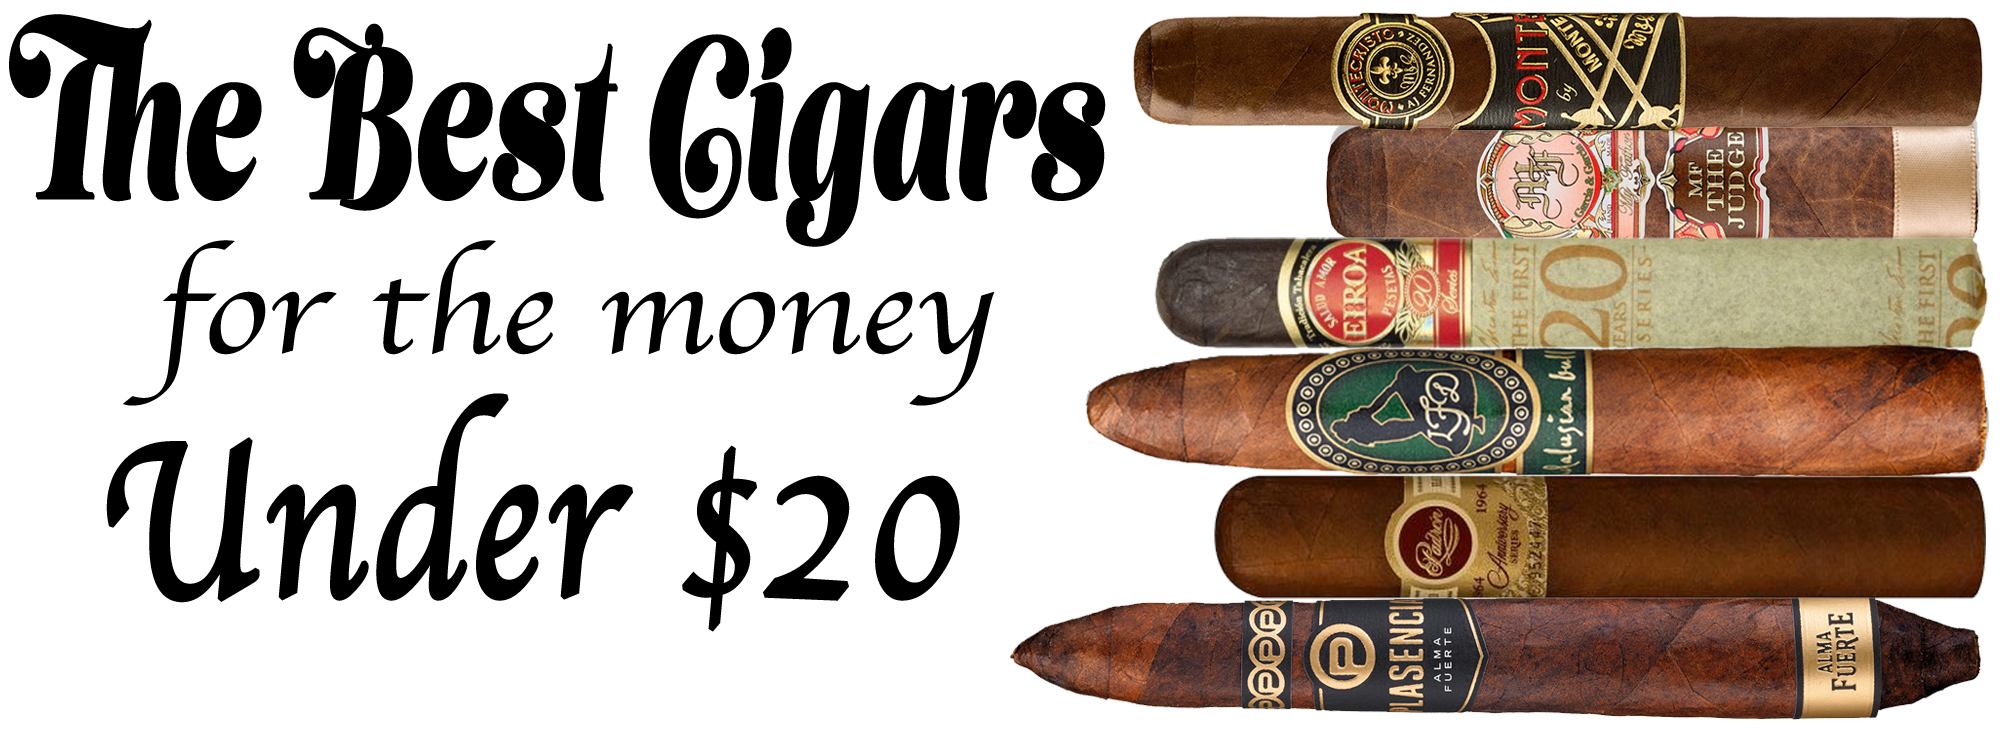 The Best Cigars for the Money: Under $20